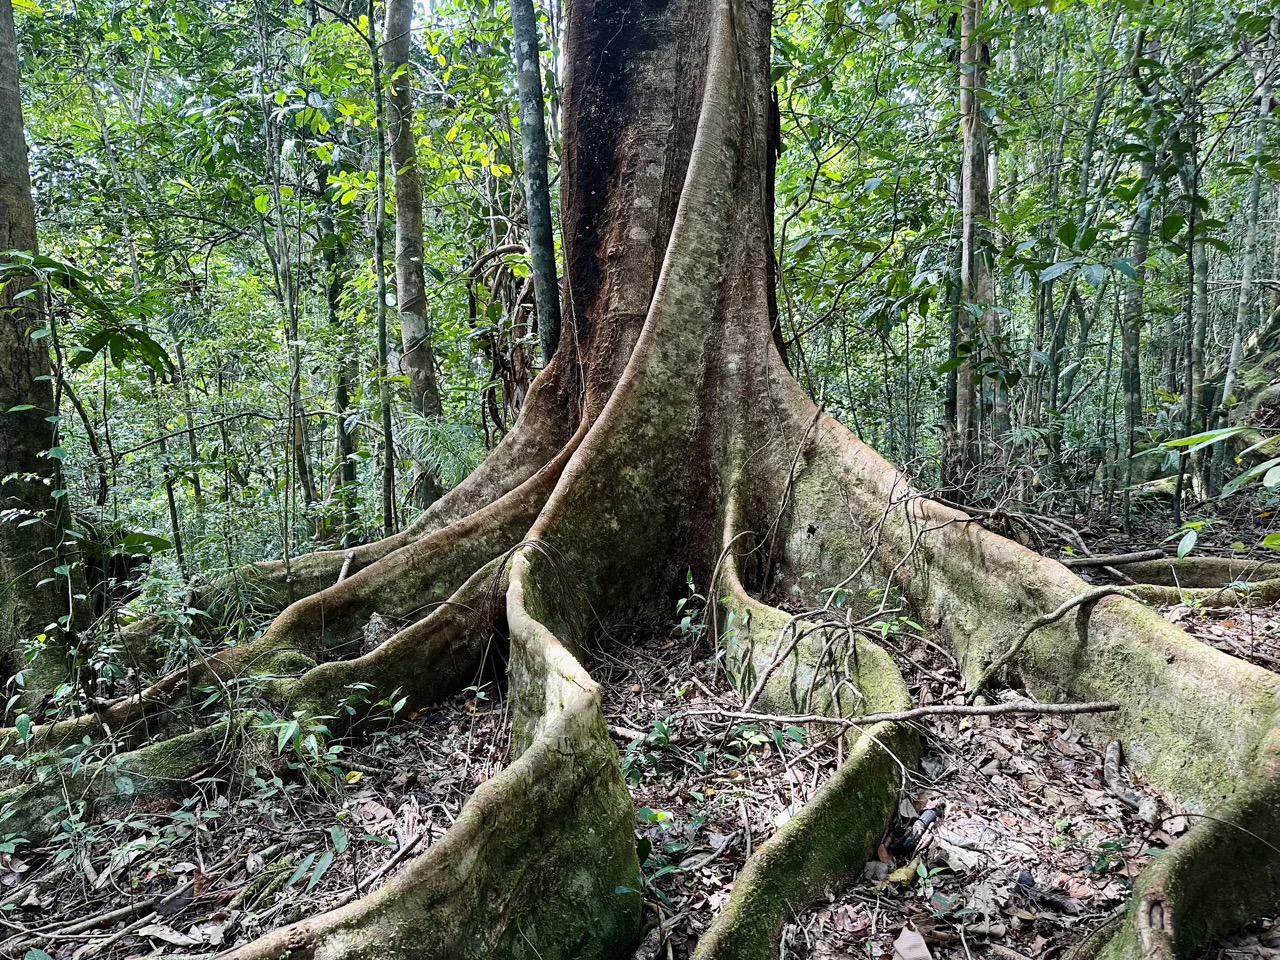 The trees are massive, and the roots incredible